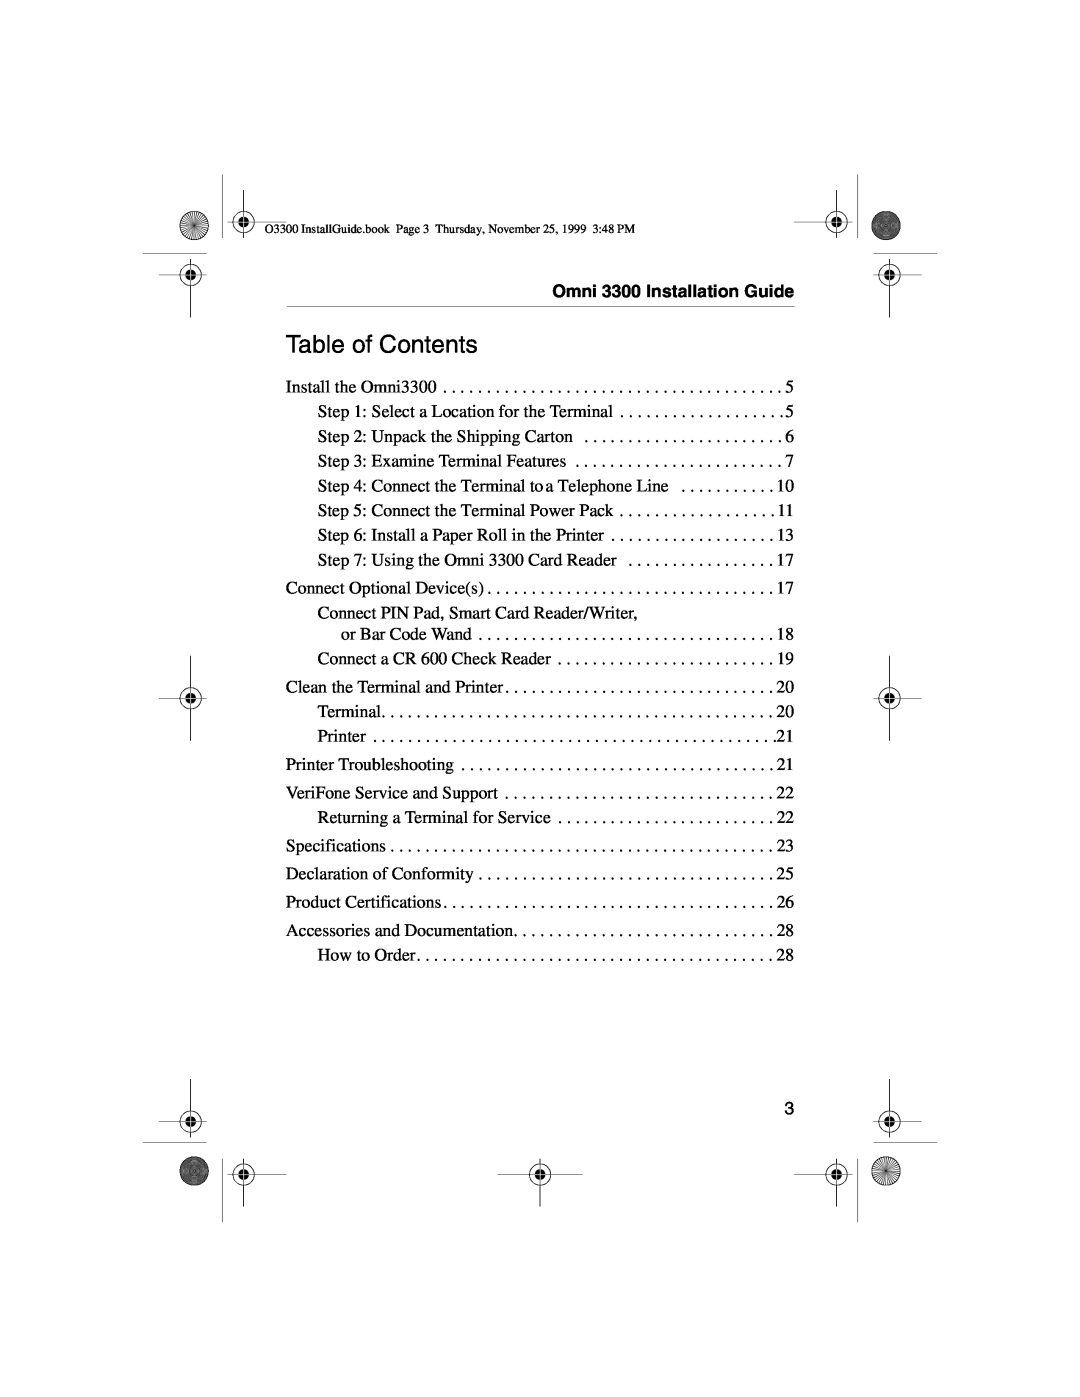 VeriFone manual Table of Contents, Omni 3300 Installation Guide 